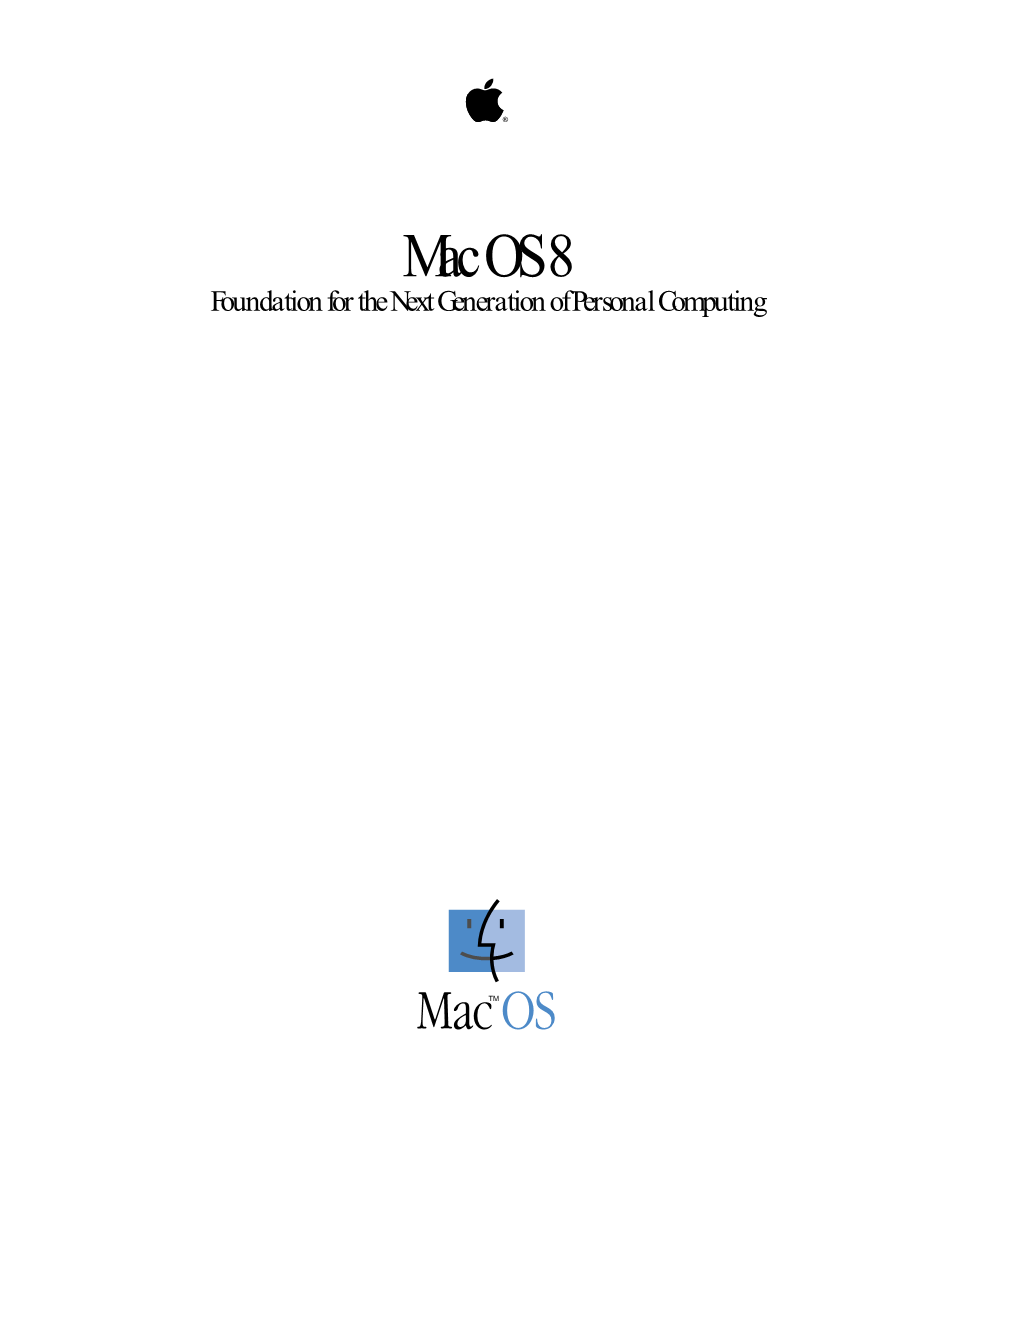 Mac OS 8 Overview